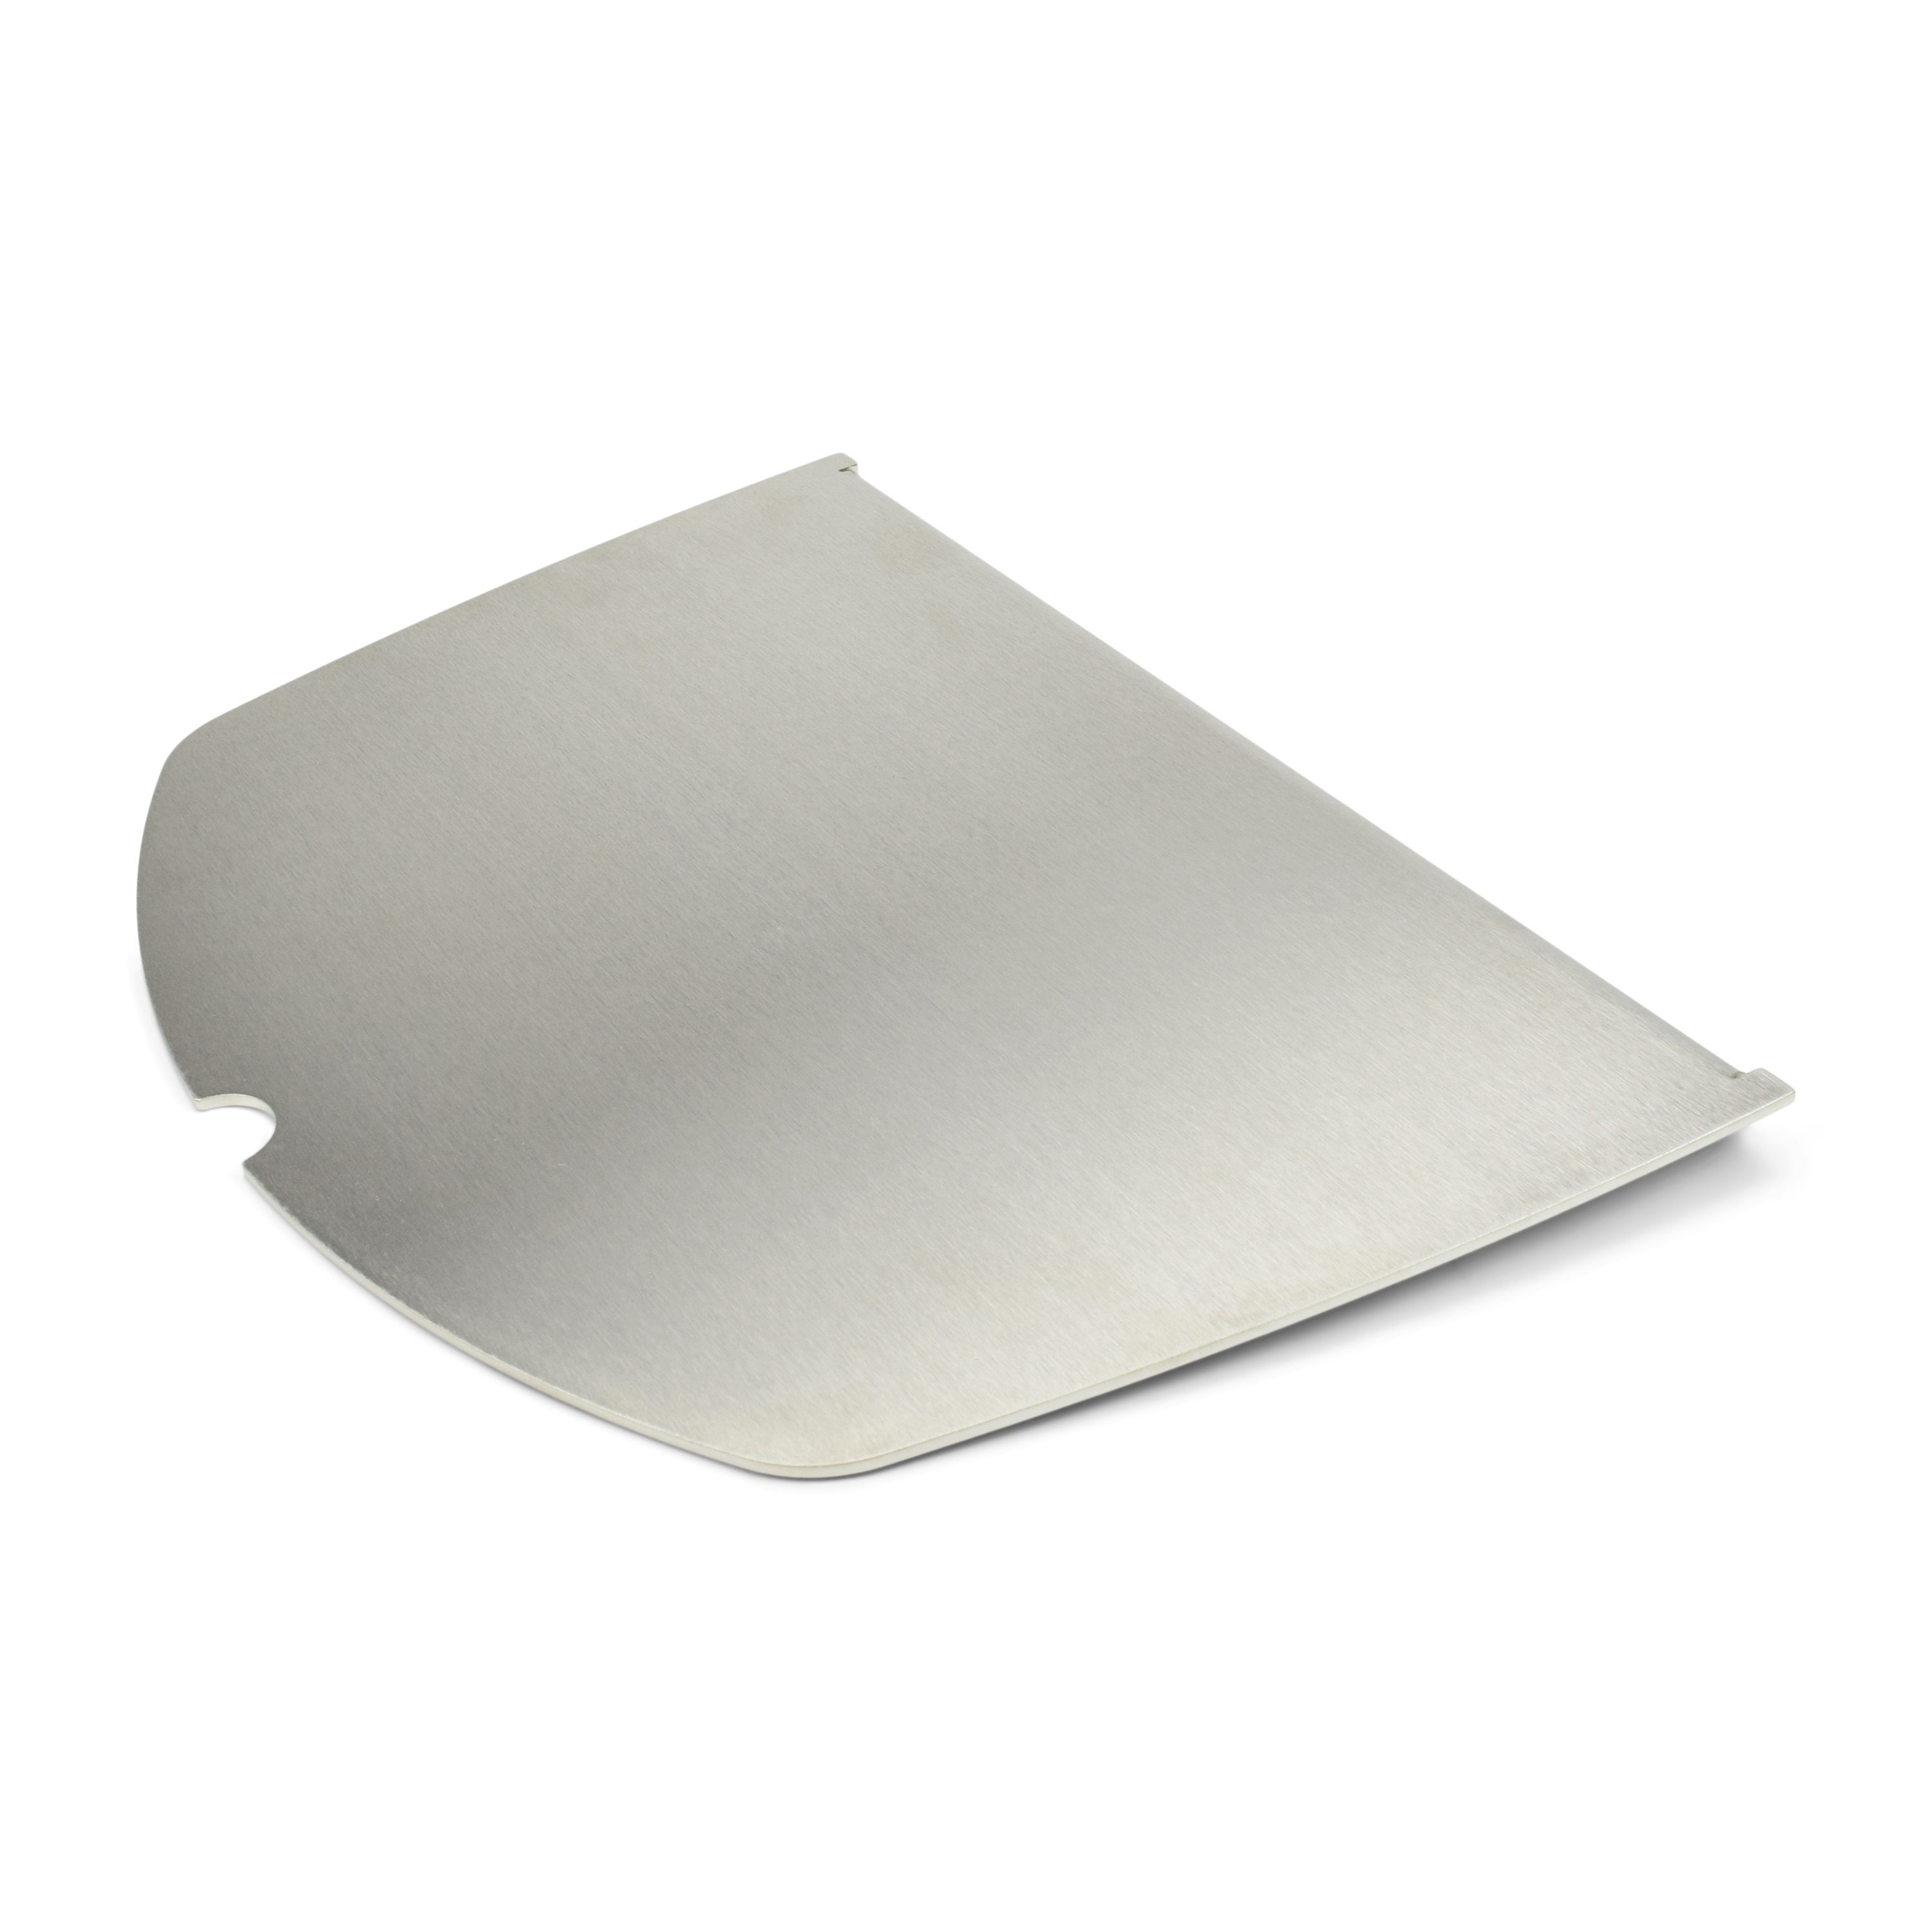 Stainless Steel Plancha for Weber Grill plate Q300 and Q3000 models